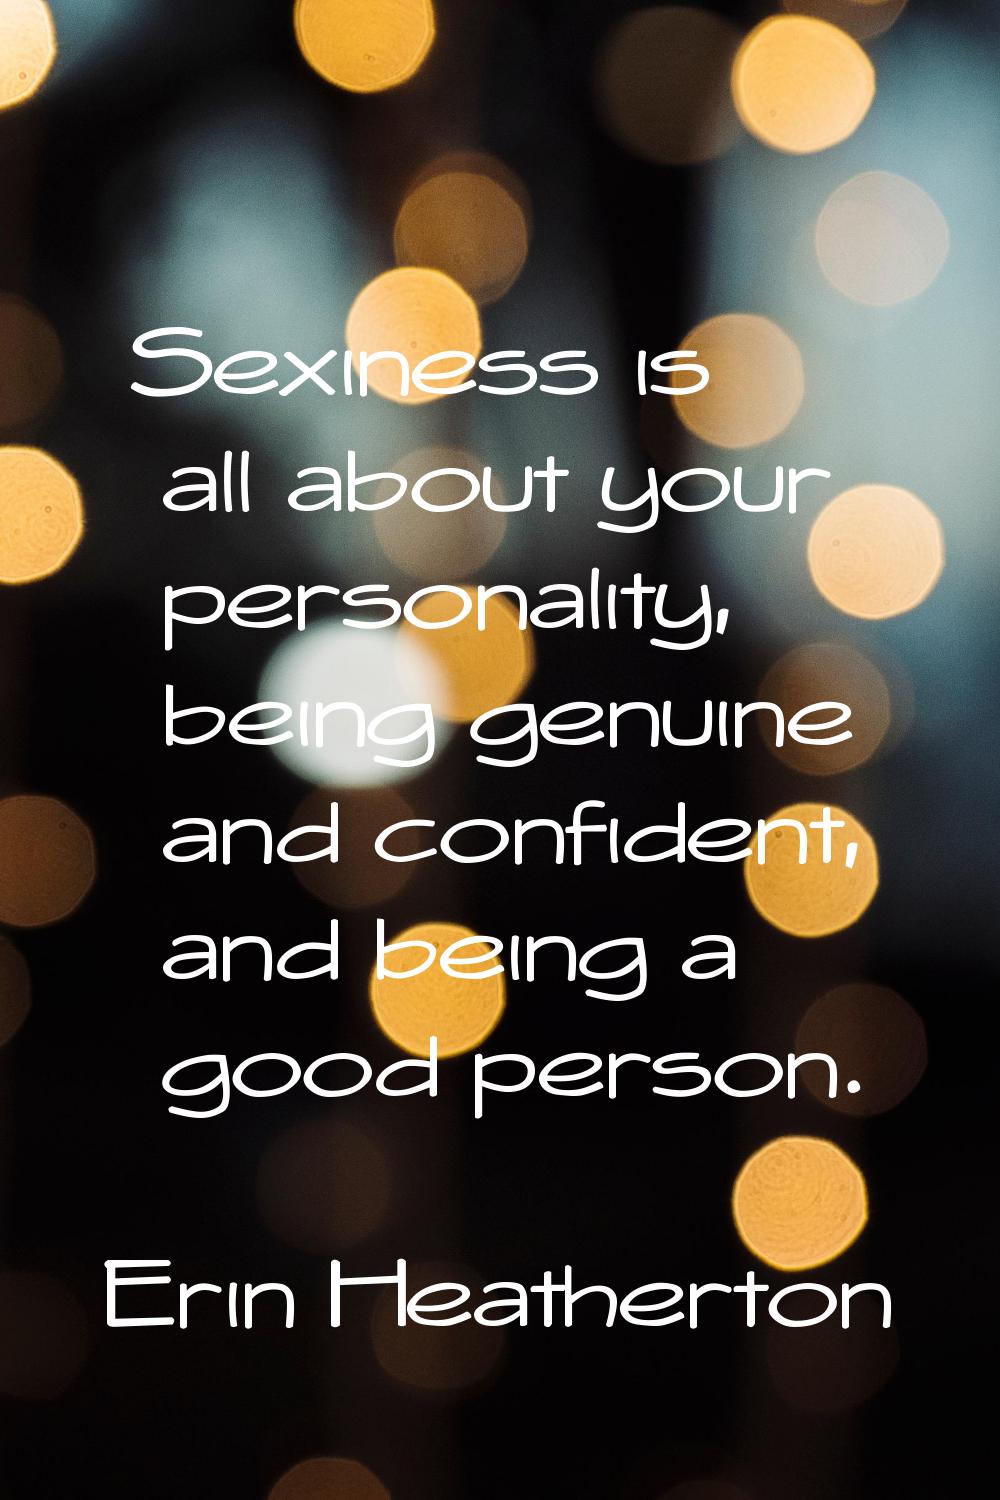 Sexiness is all about your personality, being genuine and confident, and being a good person.